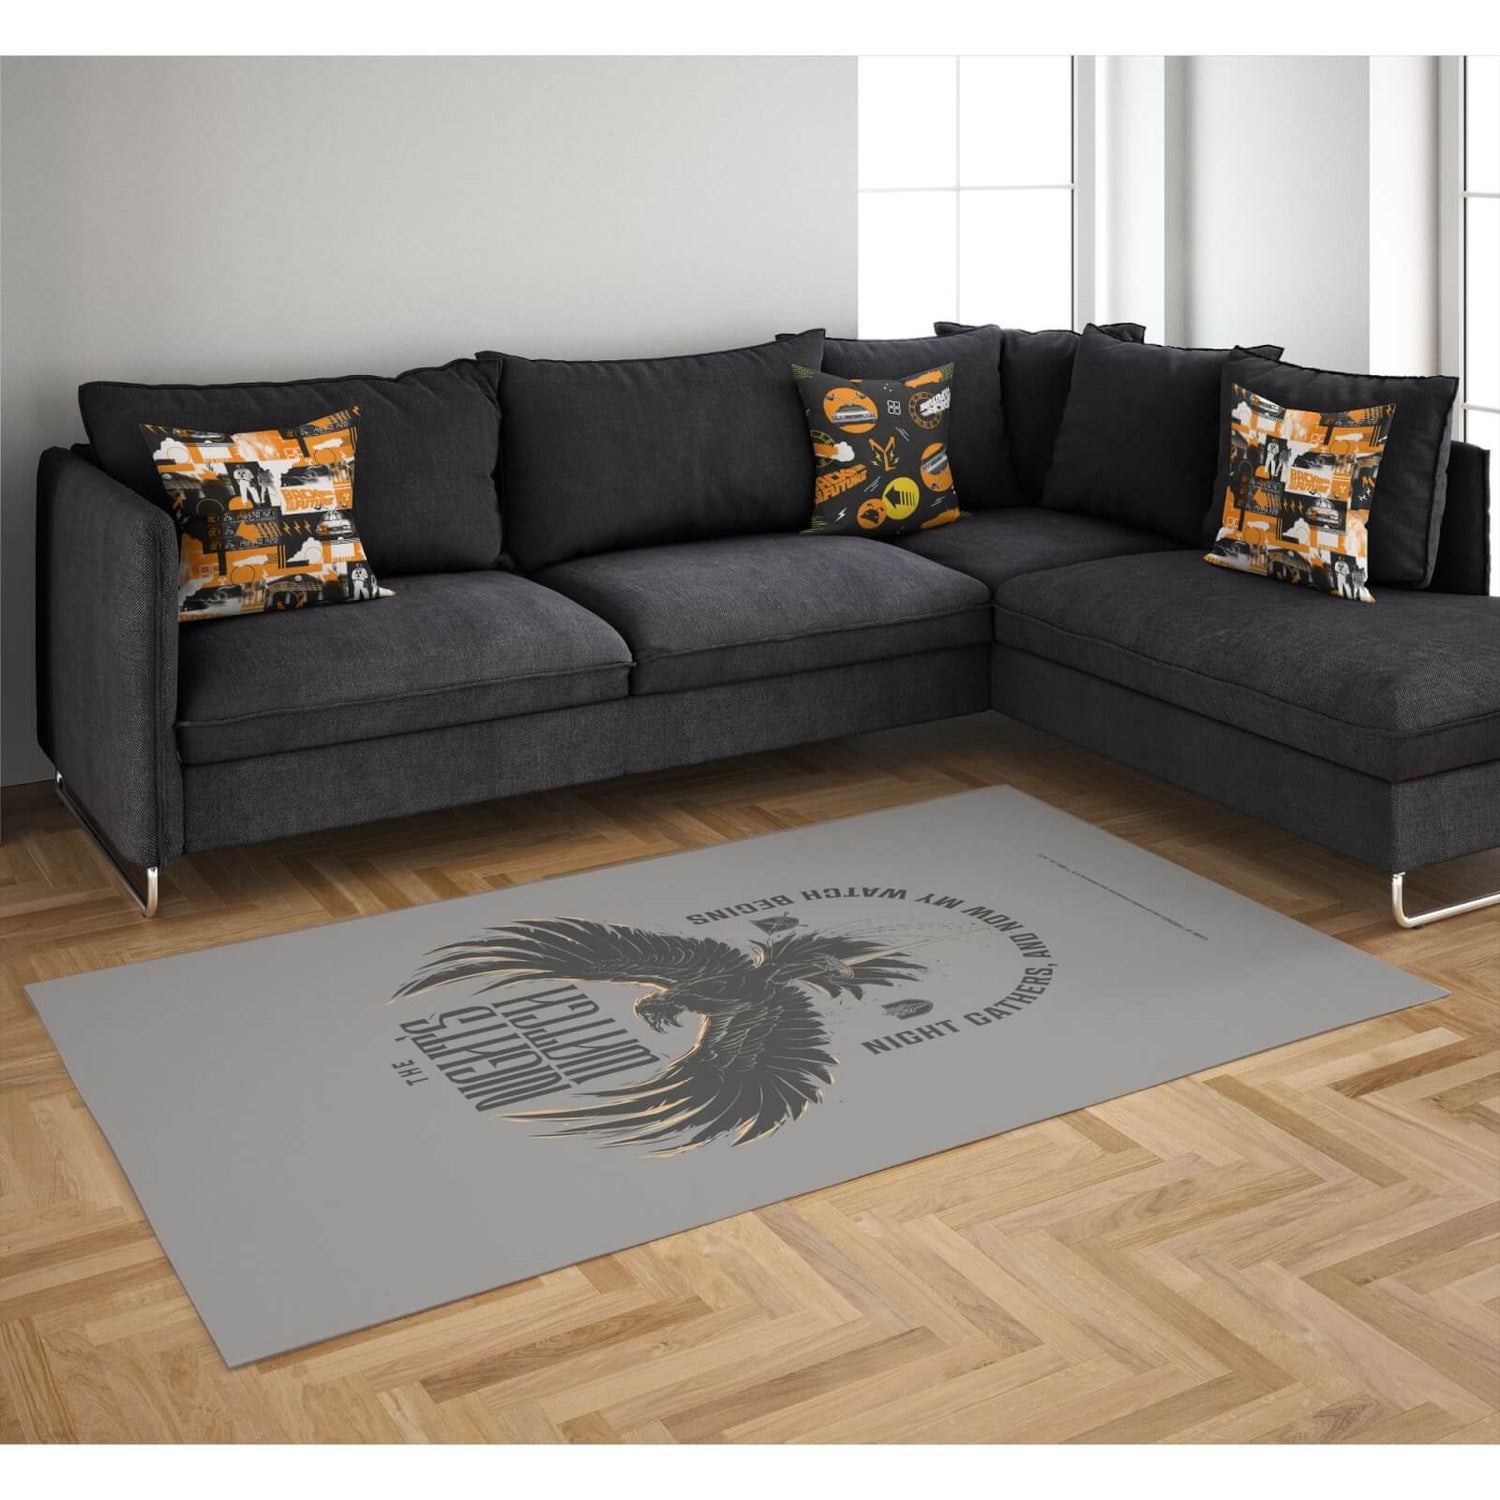 Decorsome x Game of Thrones Night's Watch Woven Rug